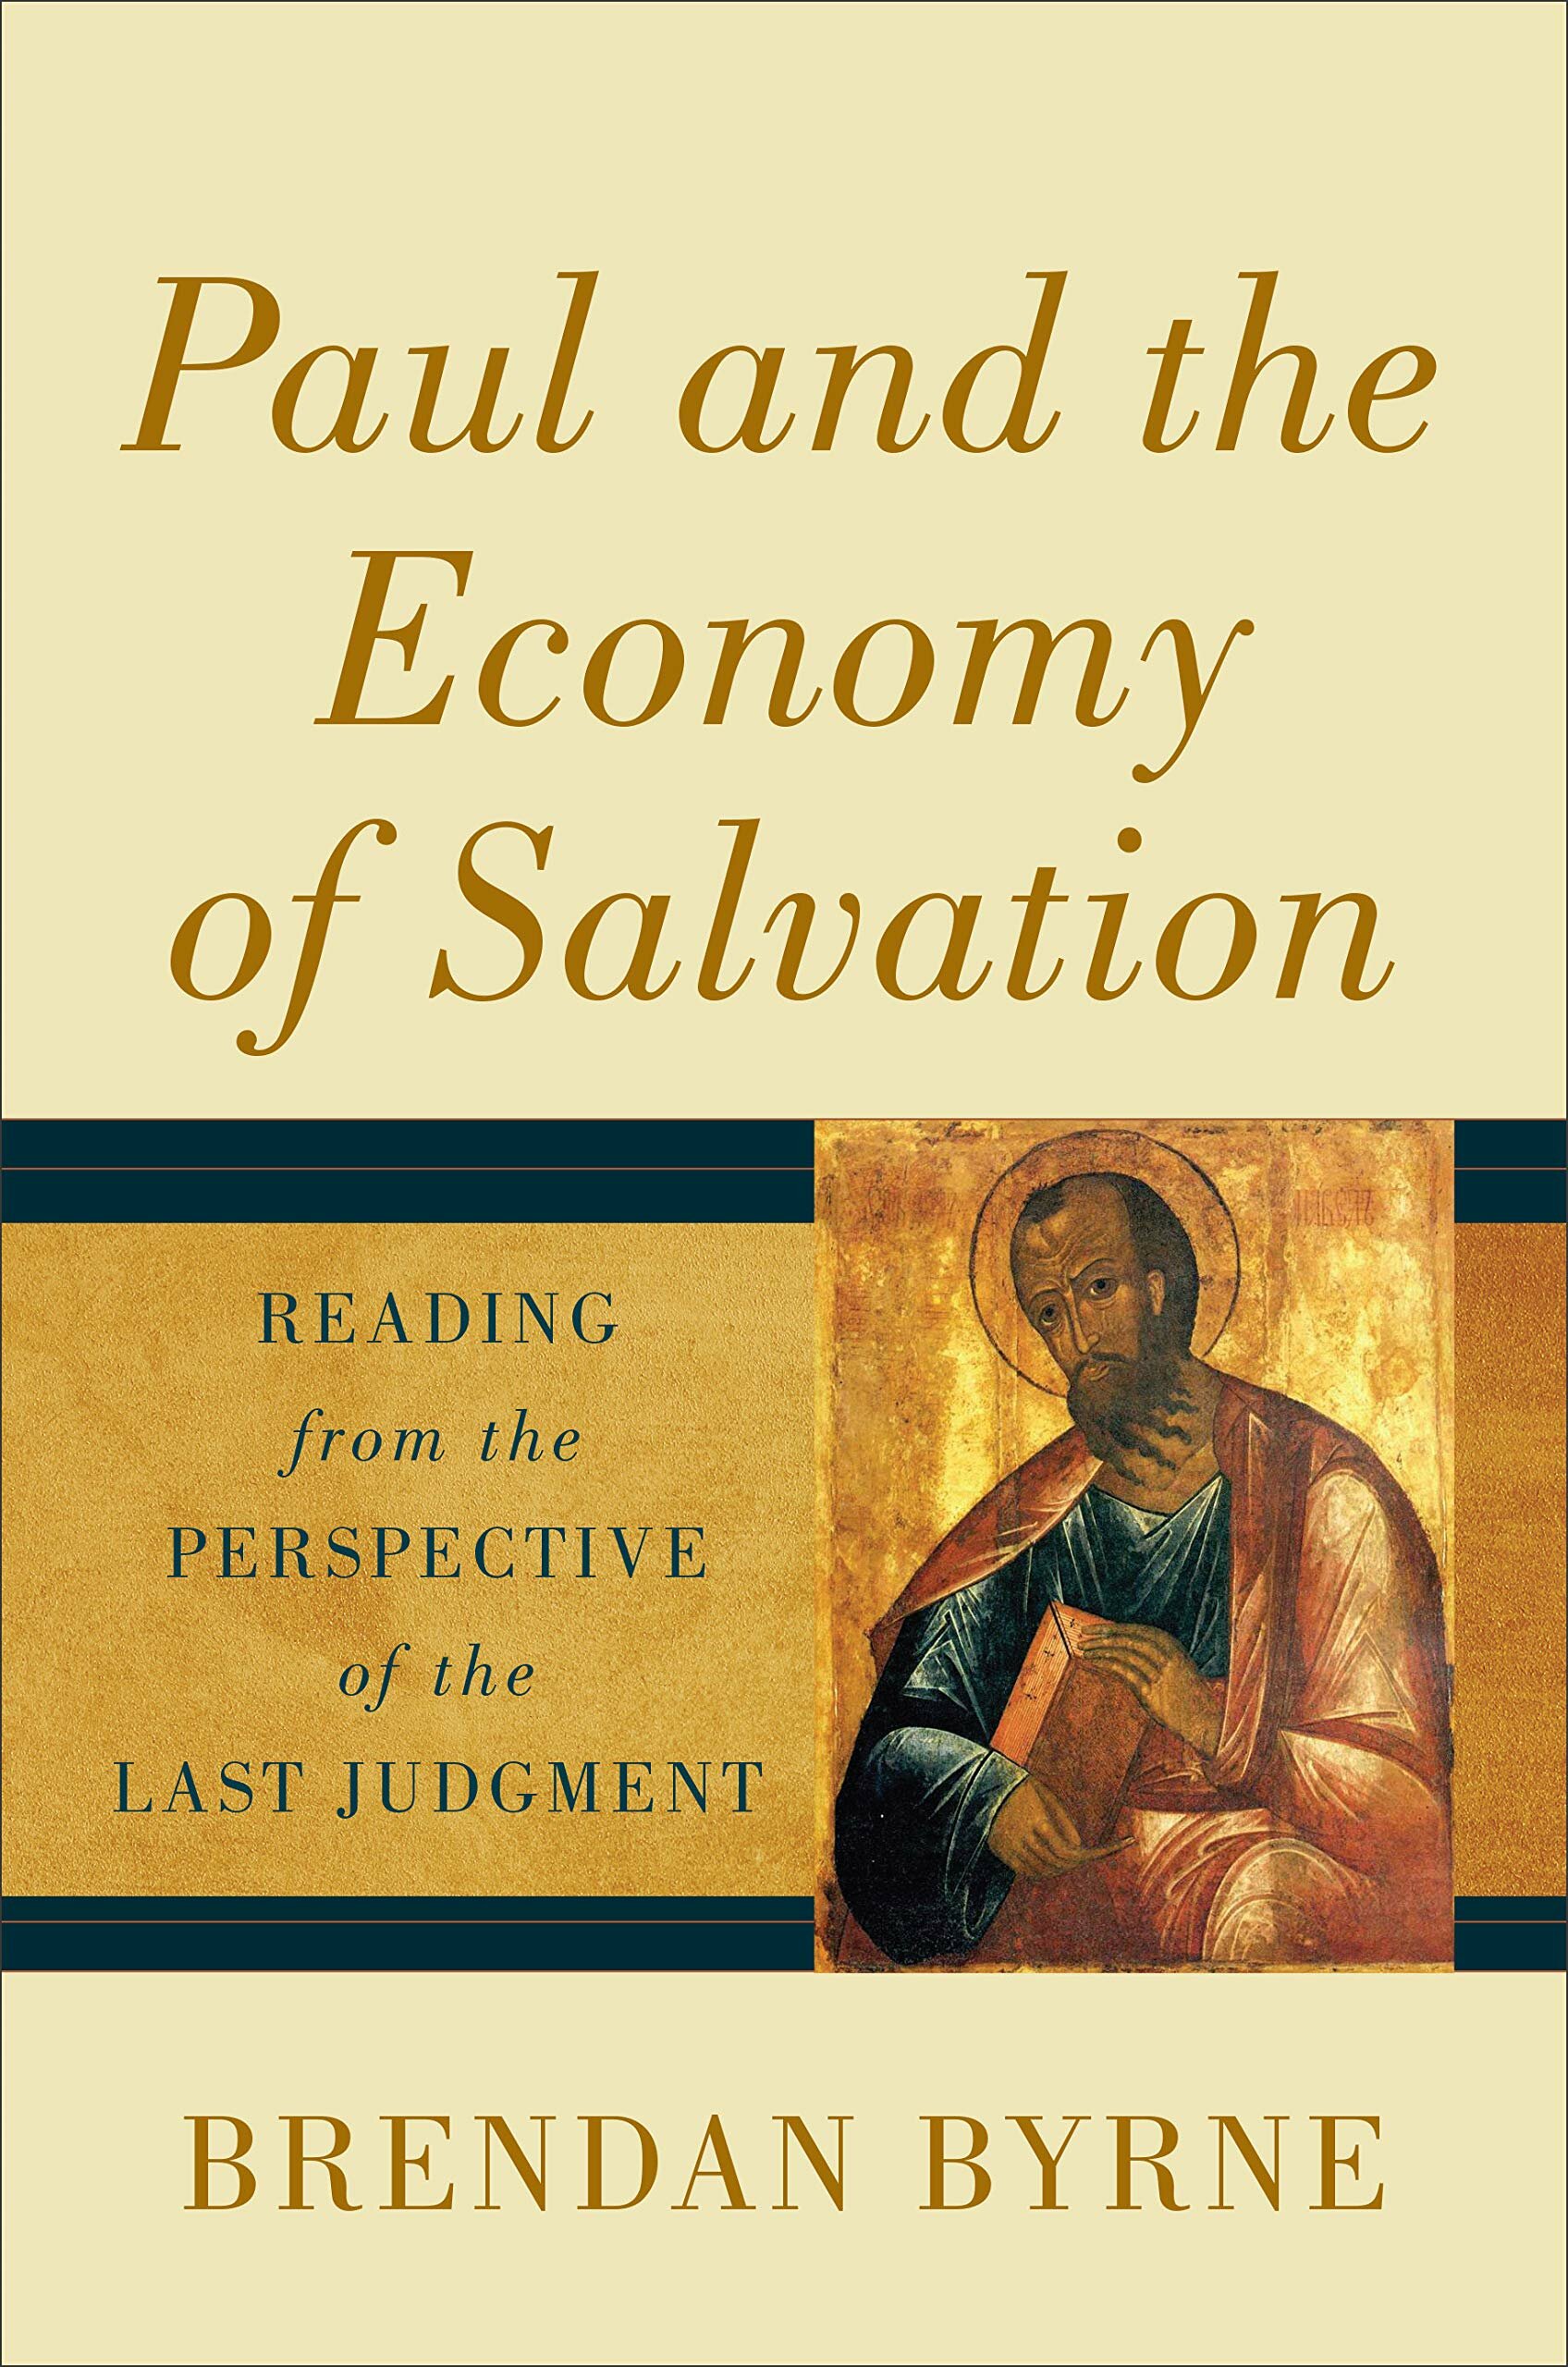 Paul and the Economy of Salvation: Reading from the Perspective of the Last Judgment